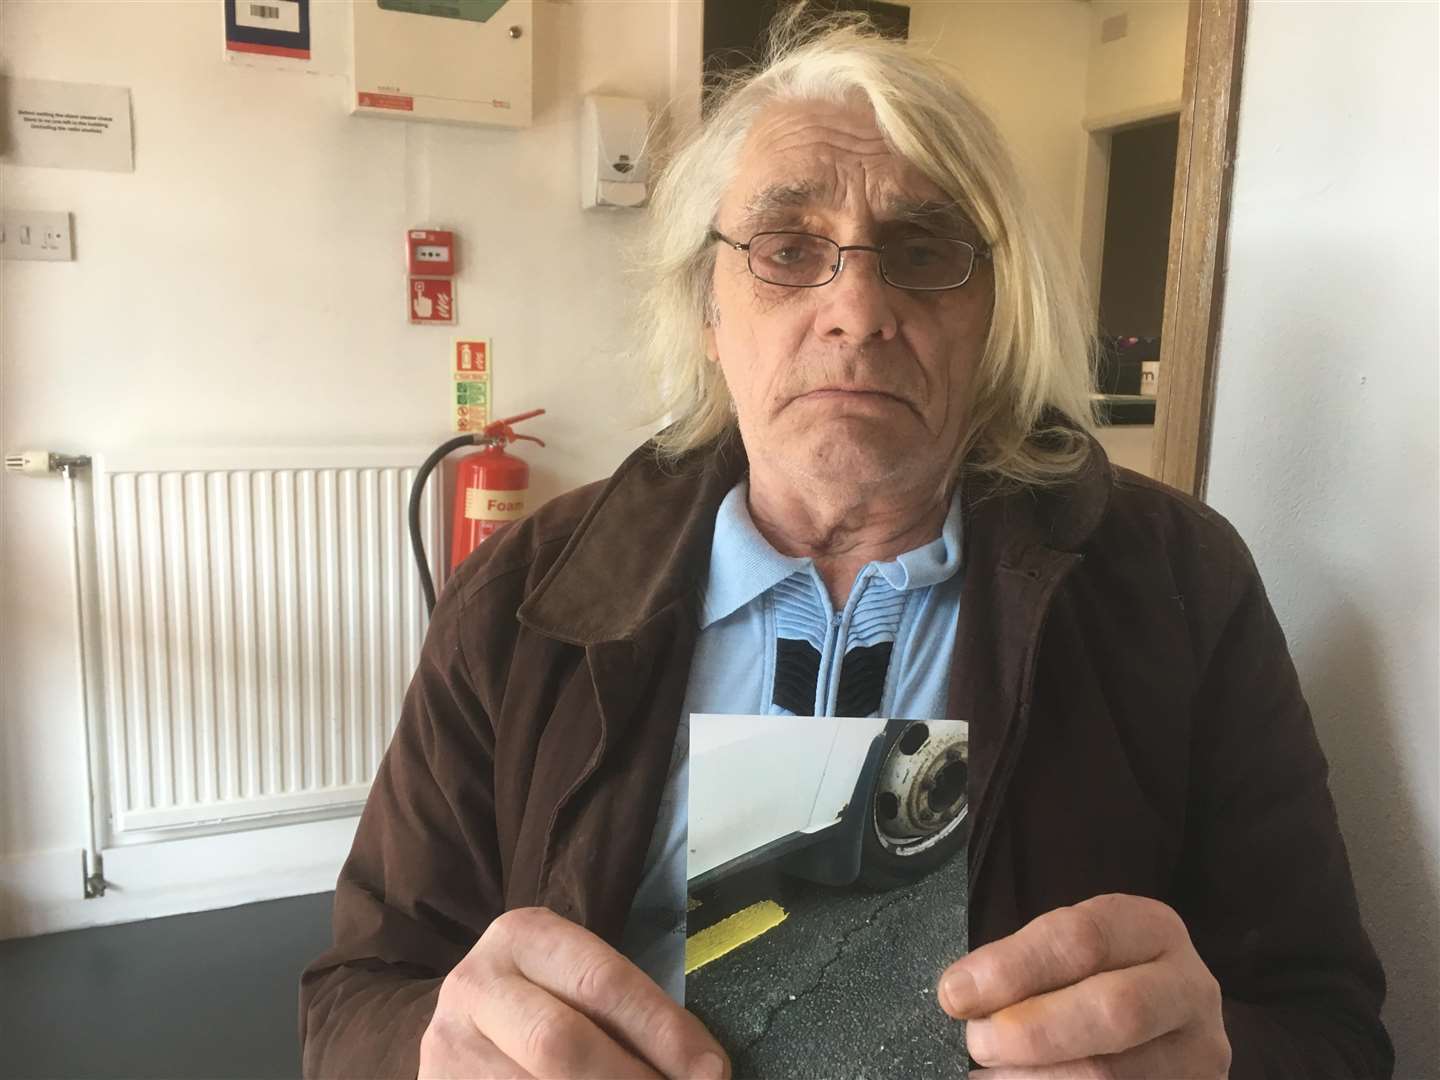 David Brown says council contractors painted yellow lines around his parked van before giving him parking tickets